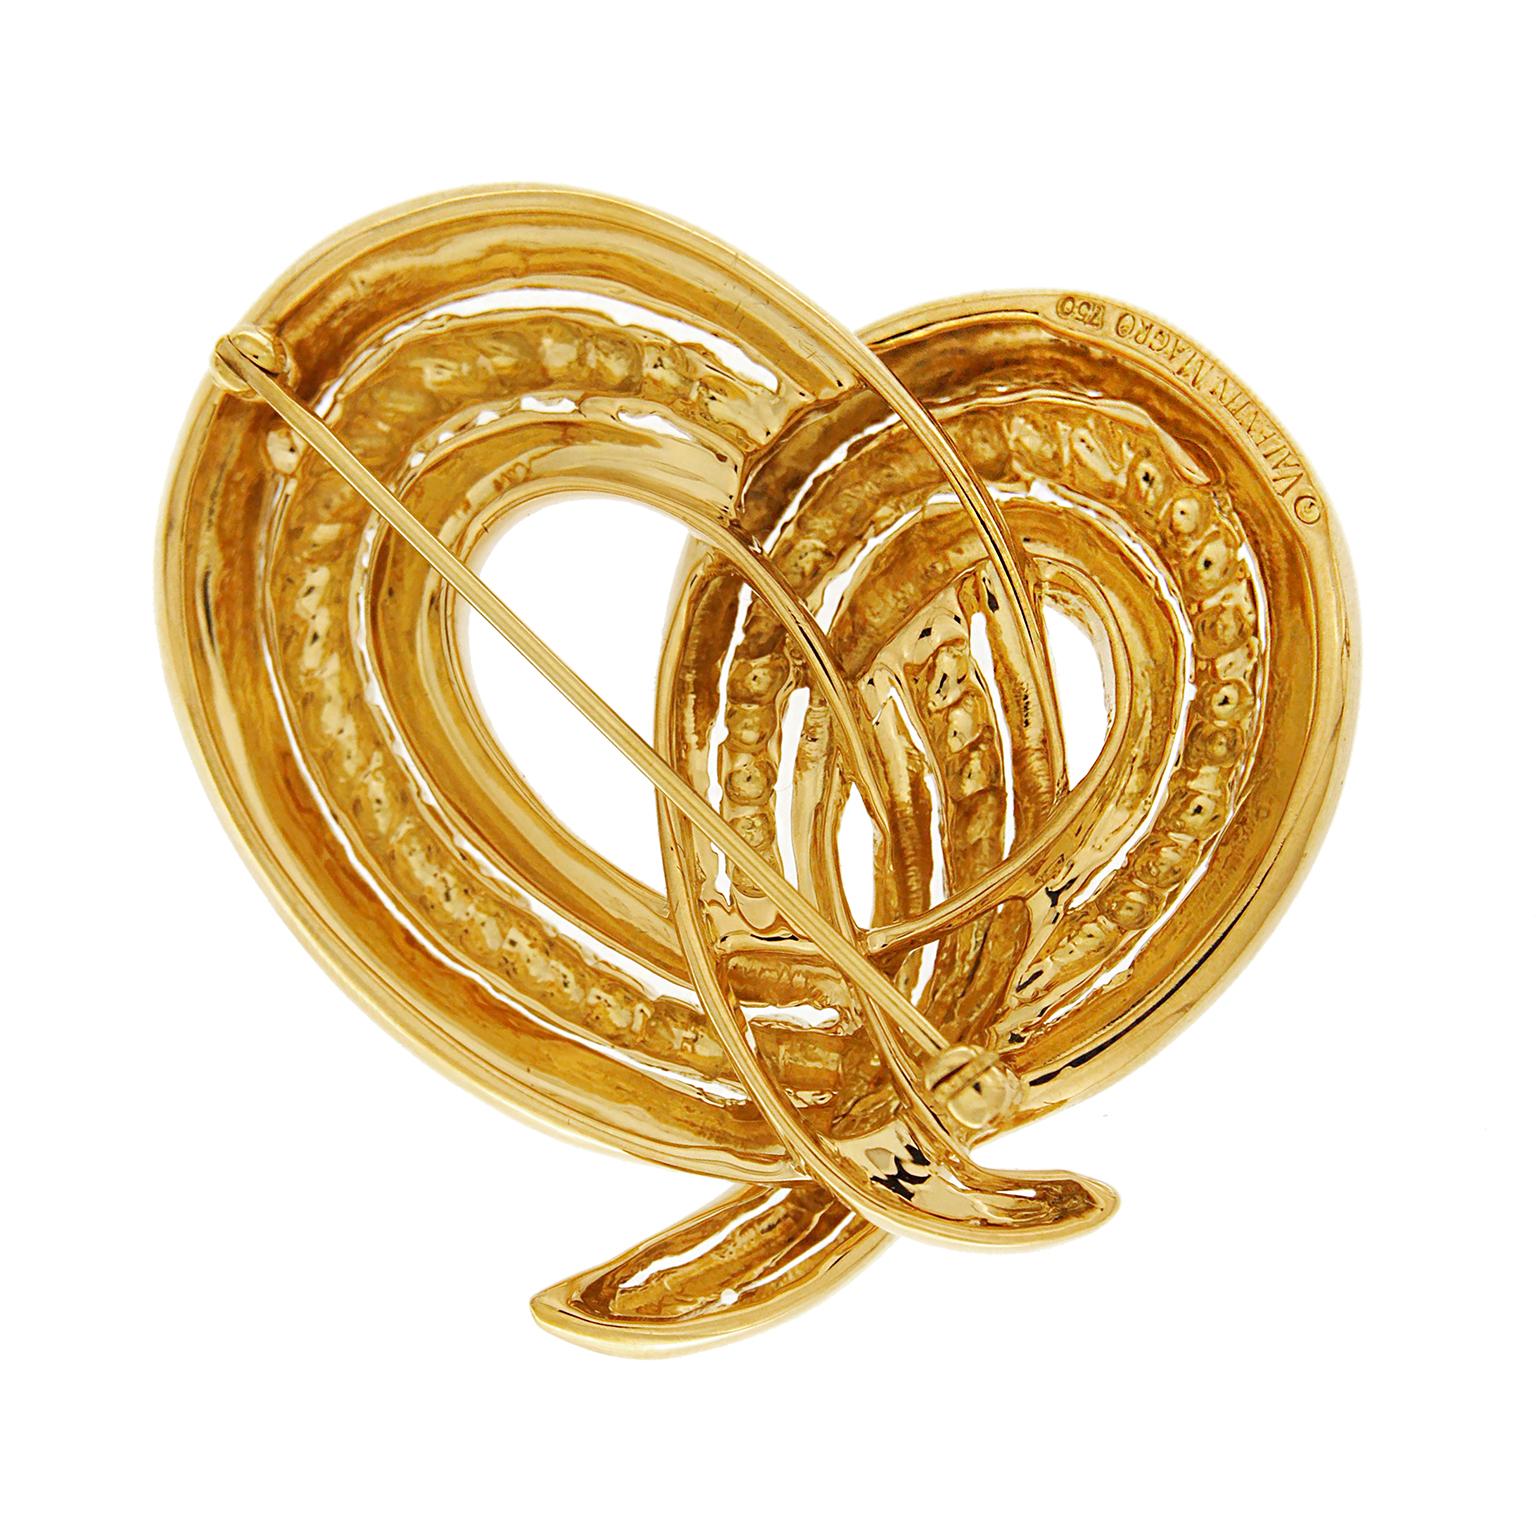 Valentin Magro Rope and Wire Overlapped Brooch creates a simple knot. Its shaping adds complexity and visual interest. The center is thicker and tapers towards the tips. Twisted 18k yellow gold makes up the majority of the design and is bordered